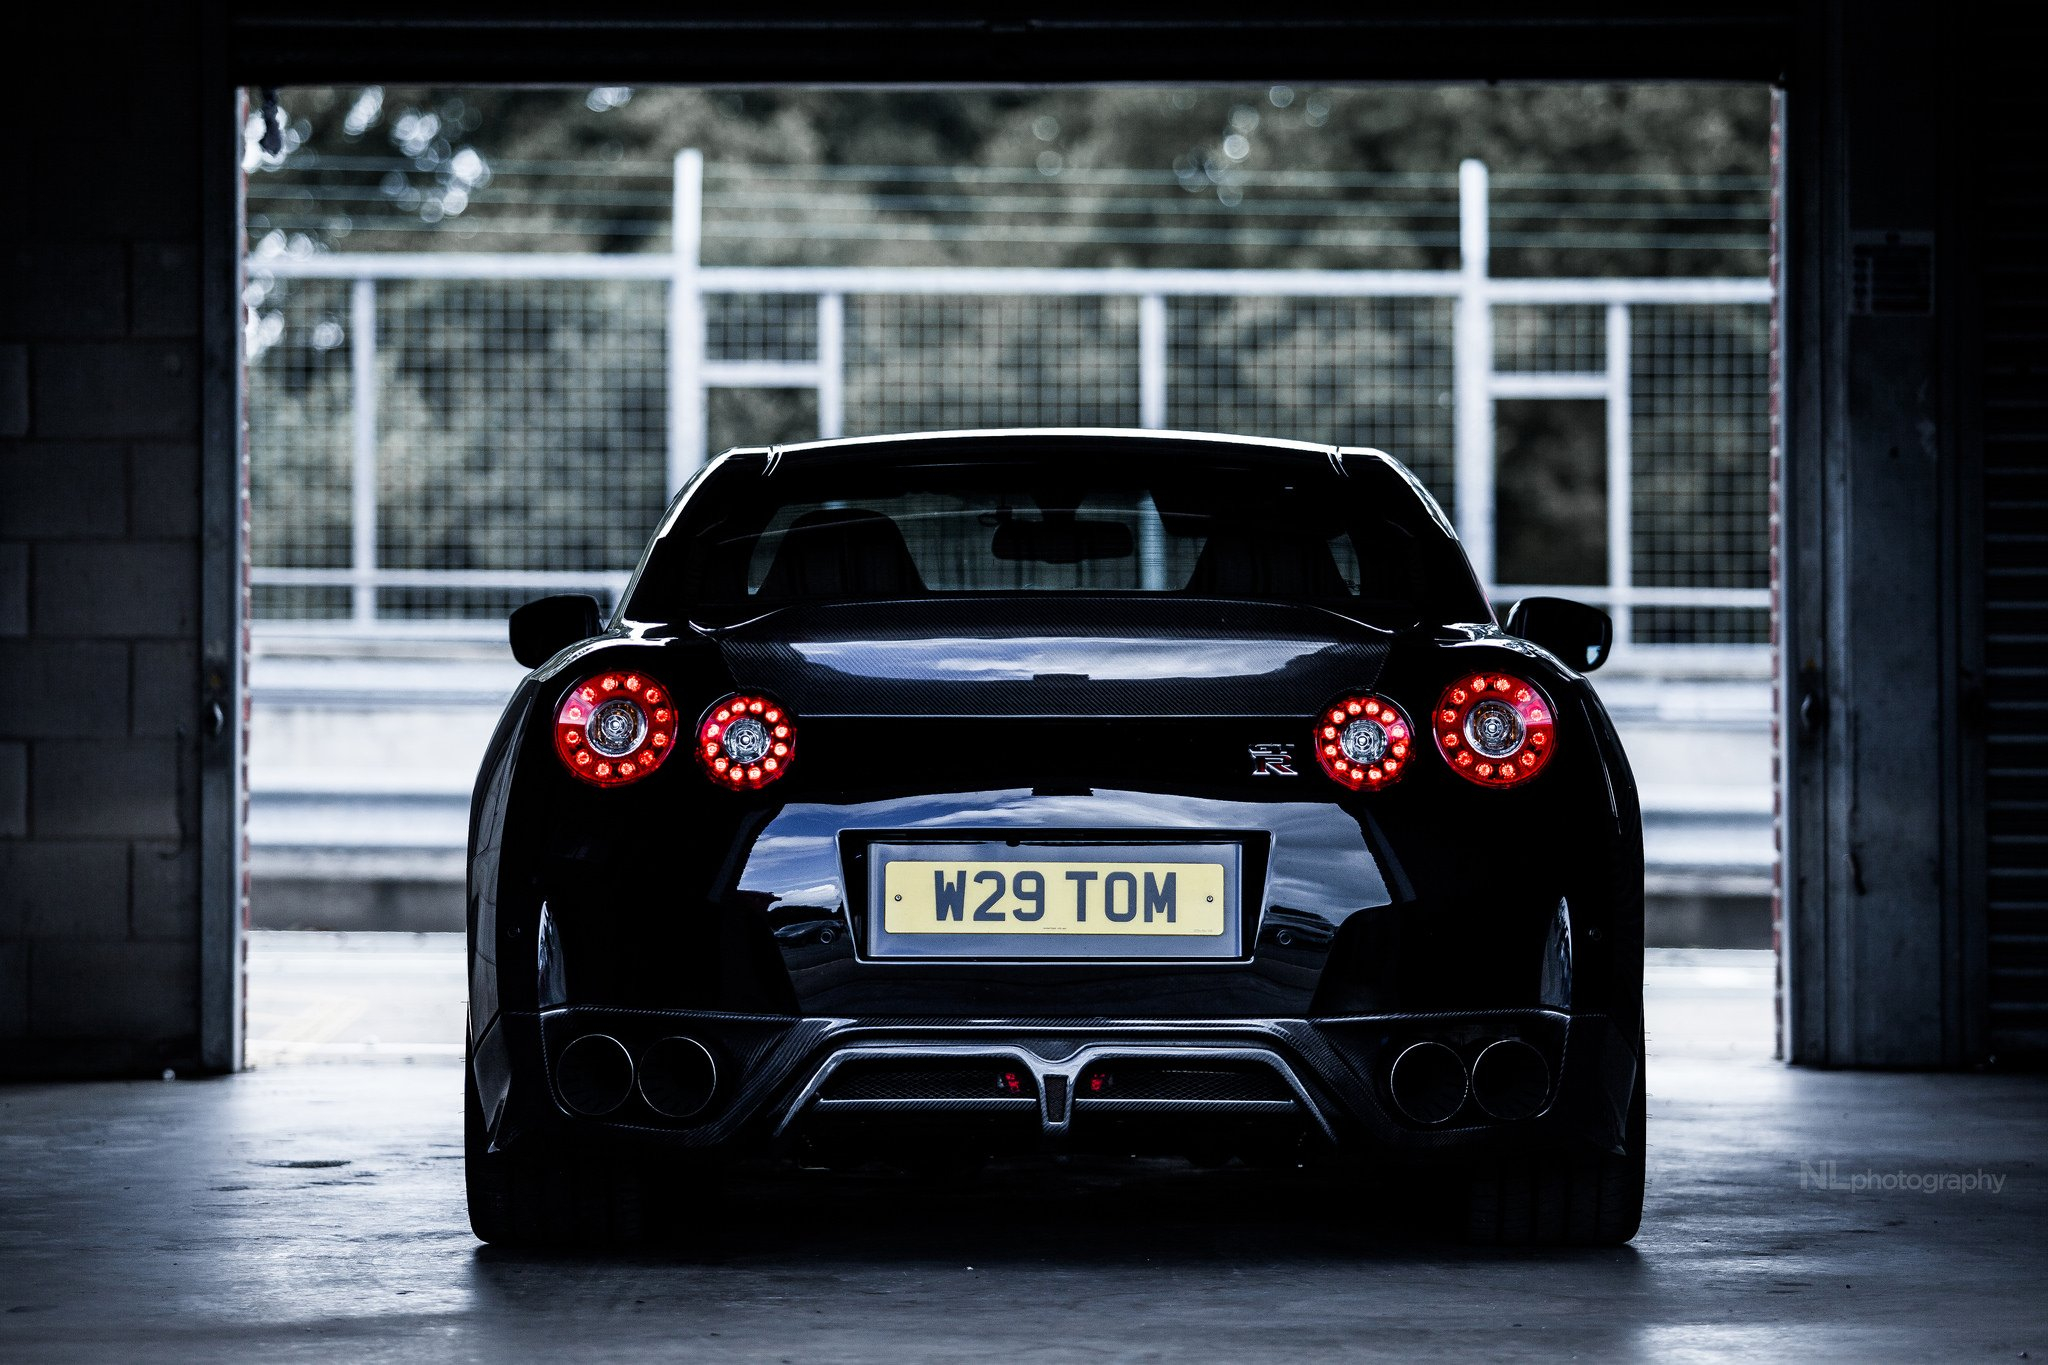 2048x1365 gt r, Nismo, Nissan, R35, Tuning, Supercar, Coupe, Japan, Noire, Black, Nero Wallpapers HD / Desktop and Mobile Backgrounds